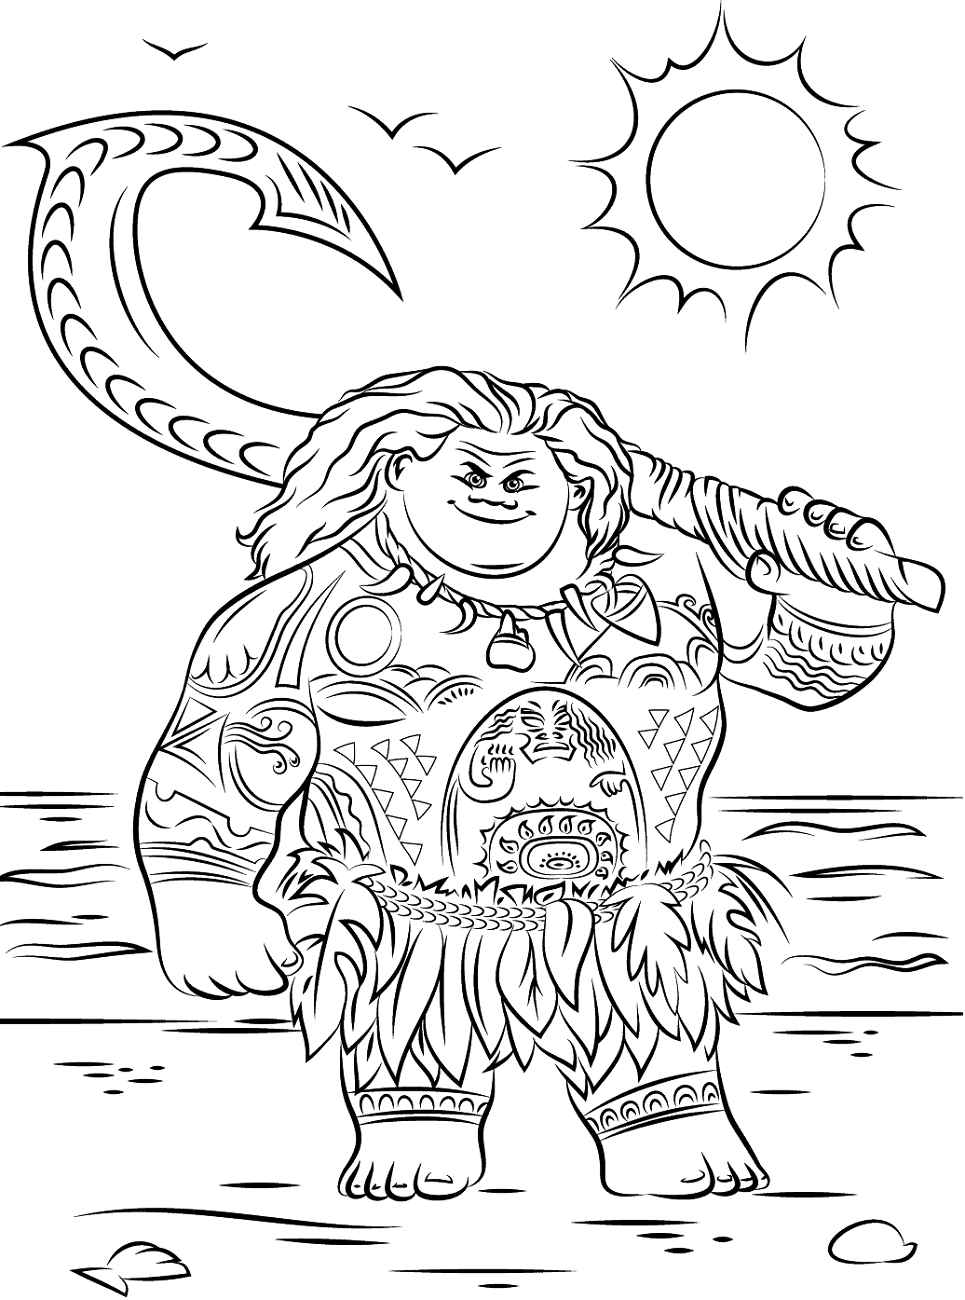 Maui Coloring Pages - Free Printable Coloring Pages for Kids